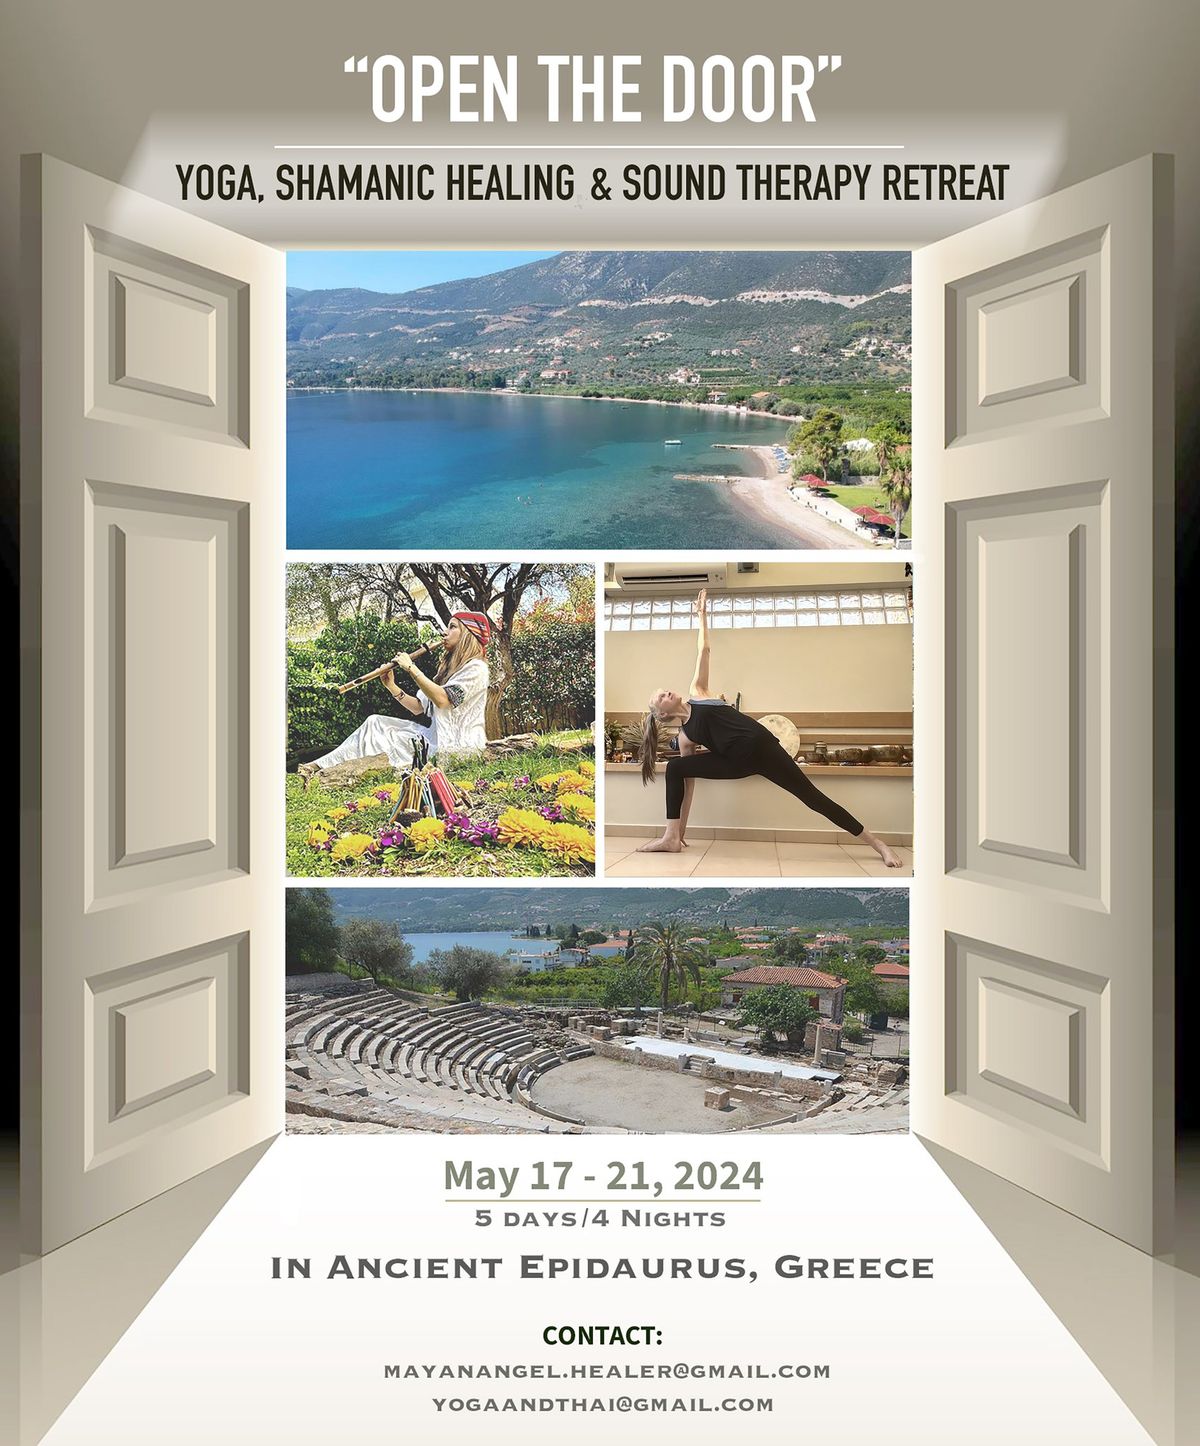 OPEN THE DOOR: Yoga, Shamanic Healing, and Sound Therapy Retreat